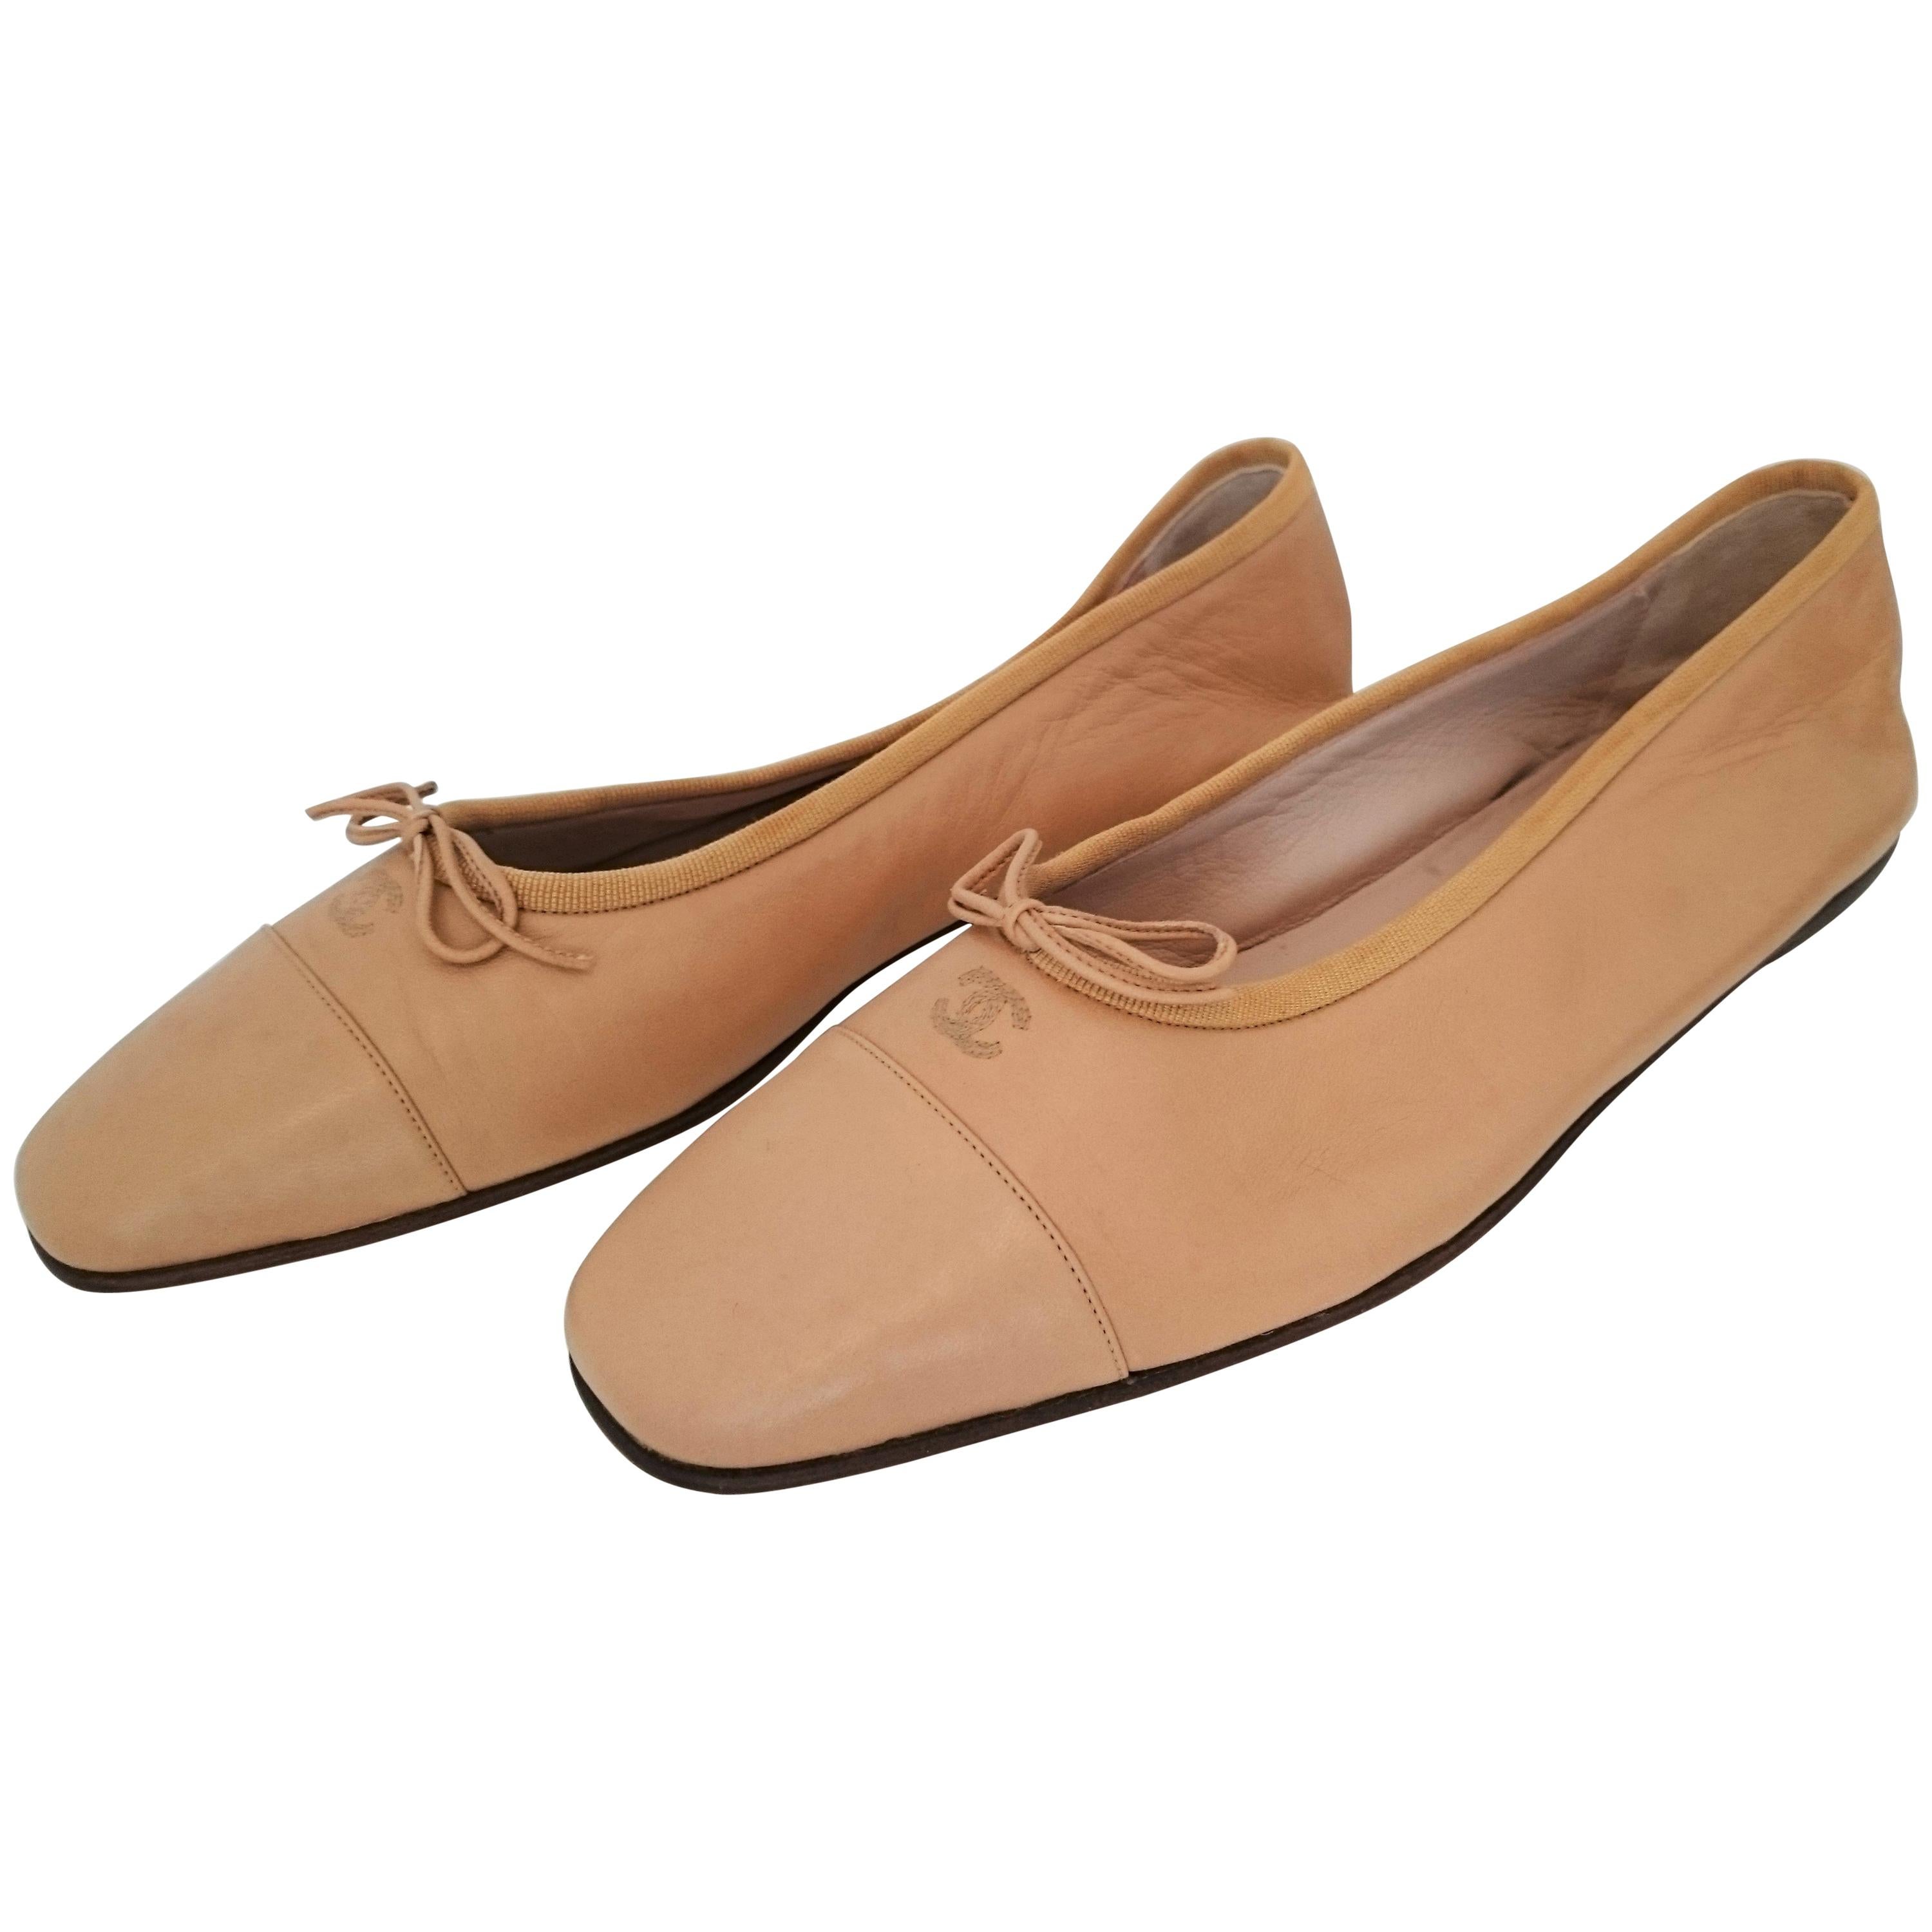 Chanel Beige Leather Ballet flats. NEW. Size 40 1/2